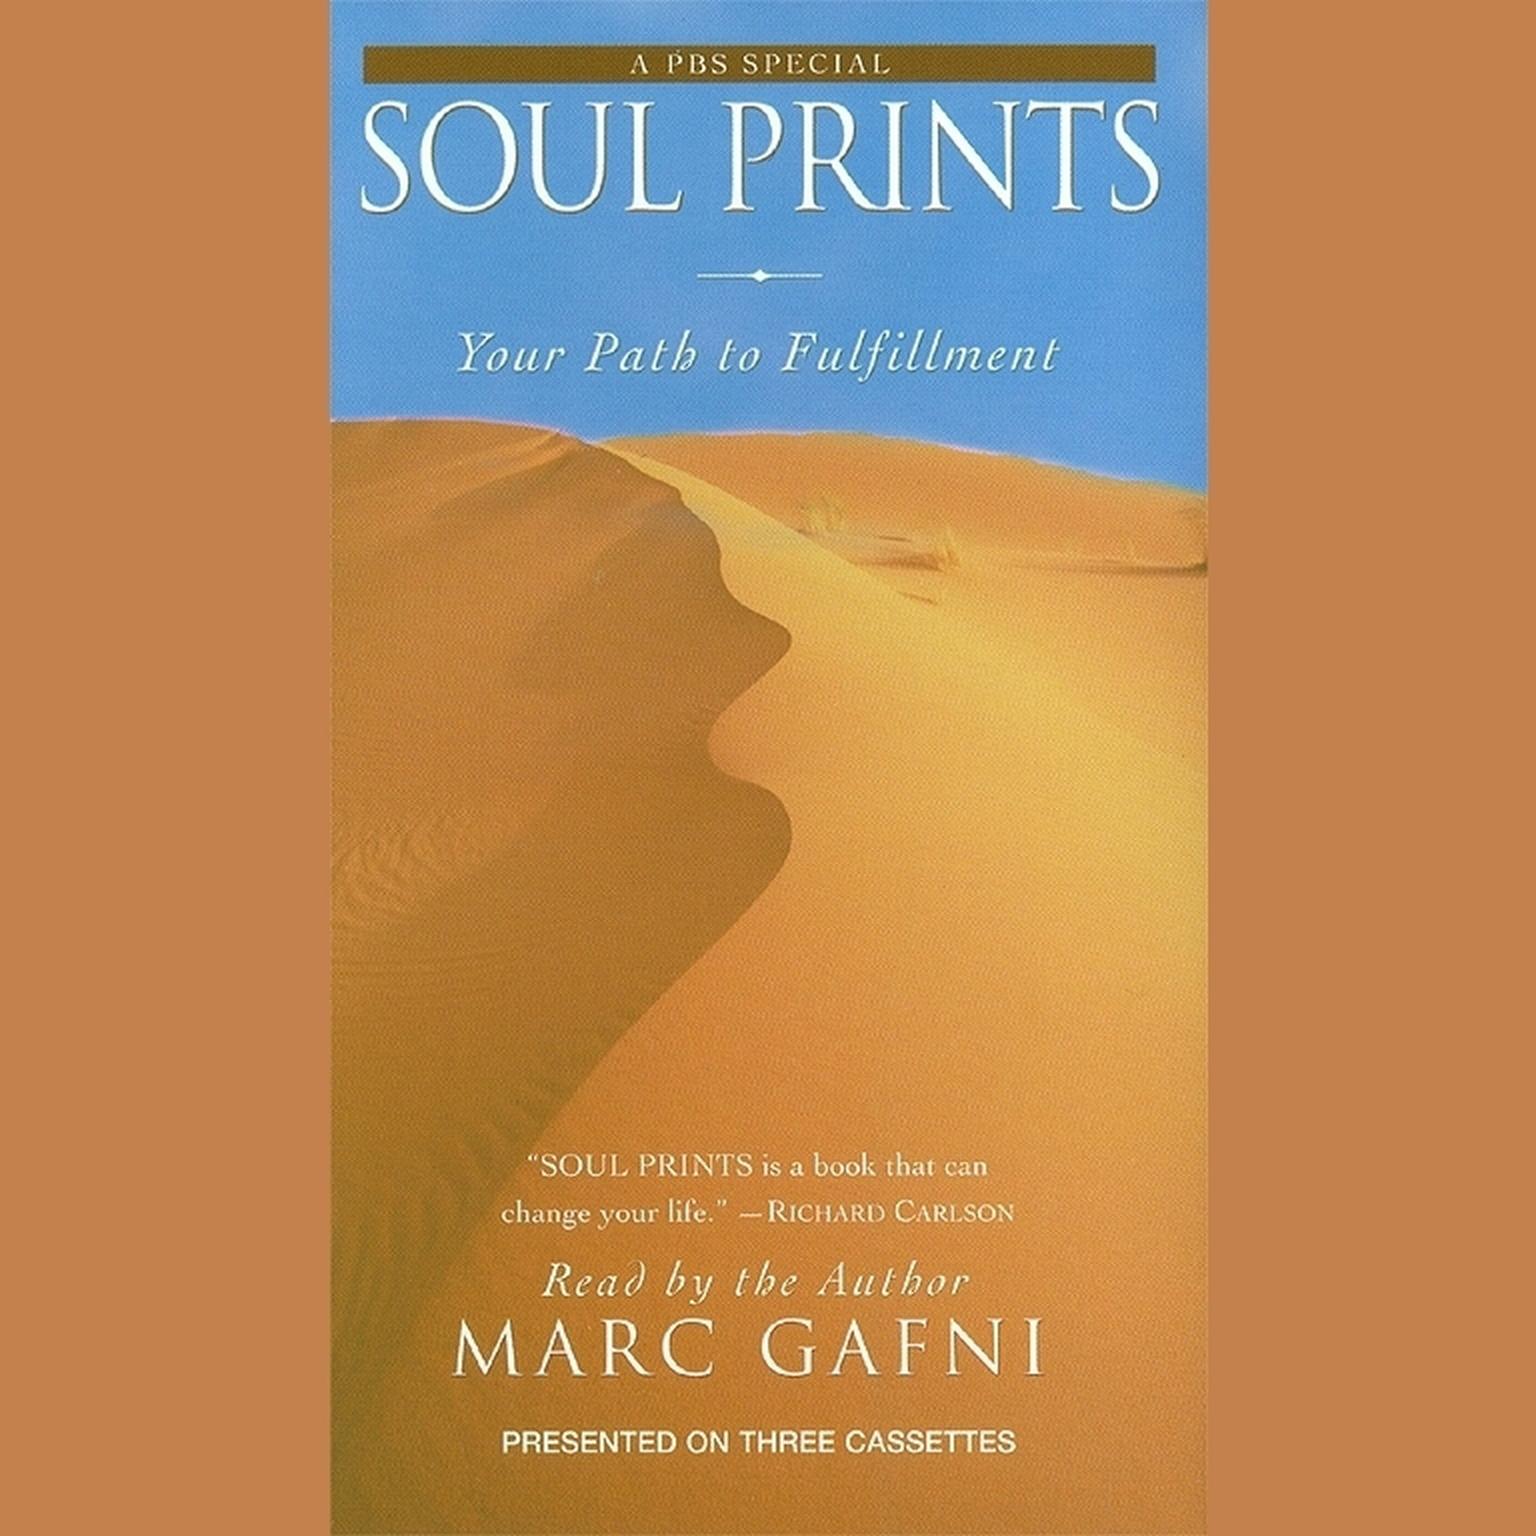 Soul Prints (Abridged): Your Path to Fulfillment Audiobook, by Marc Gafni